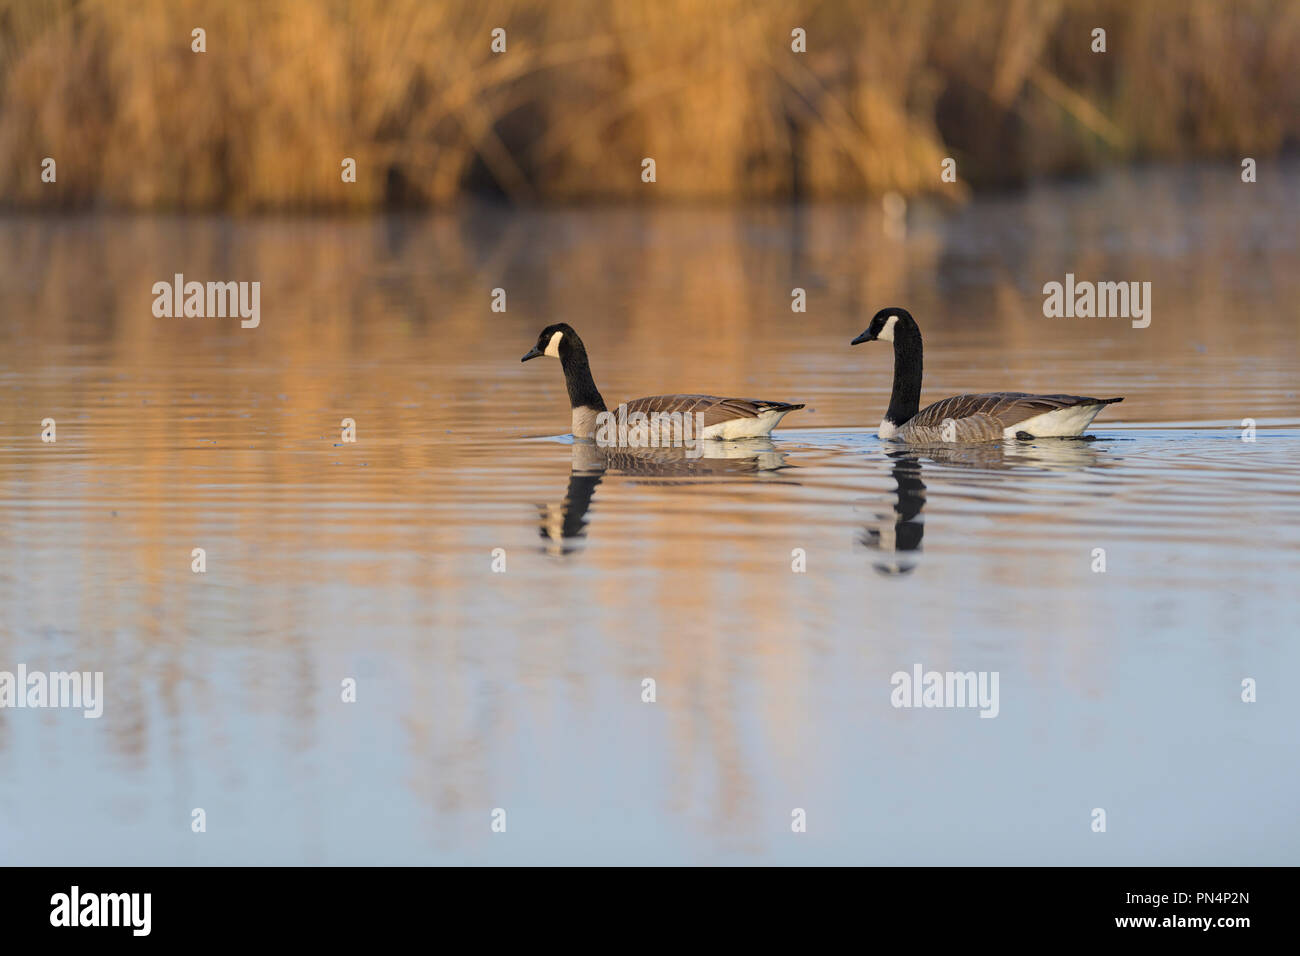 Canada goose, Branta canadensis, two geese in water swimming Stock Photo